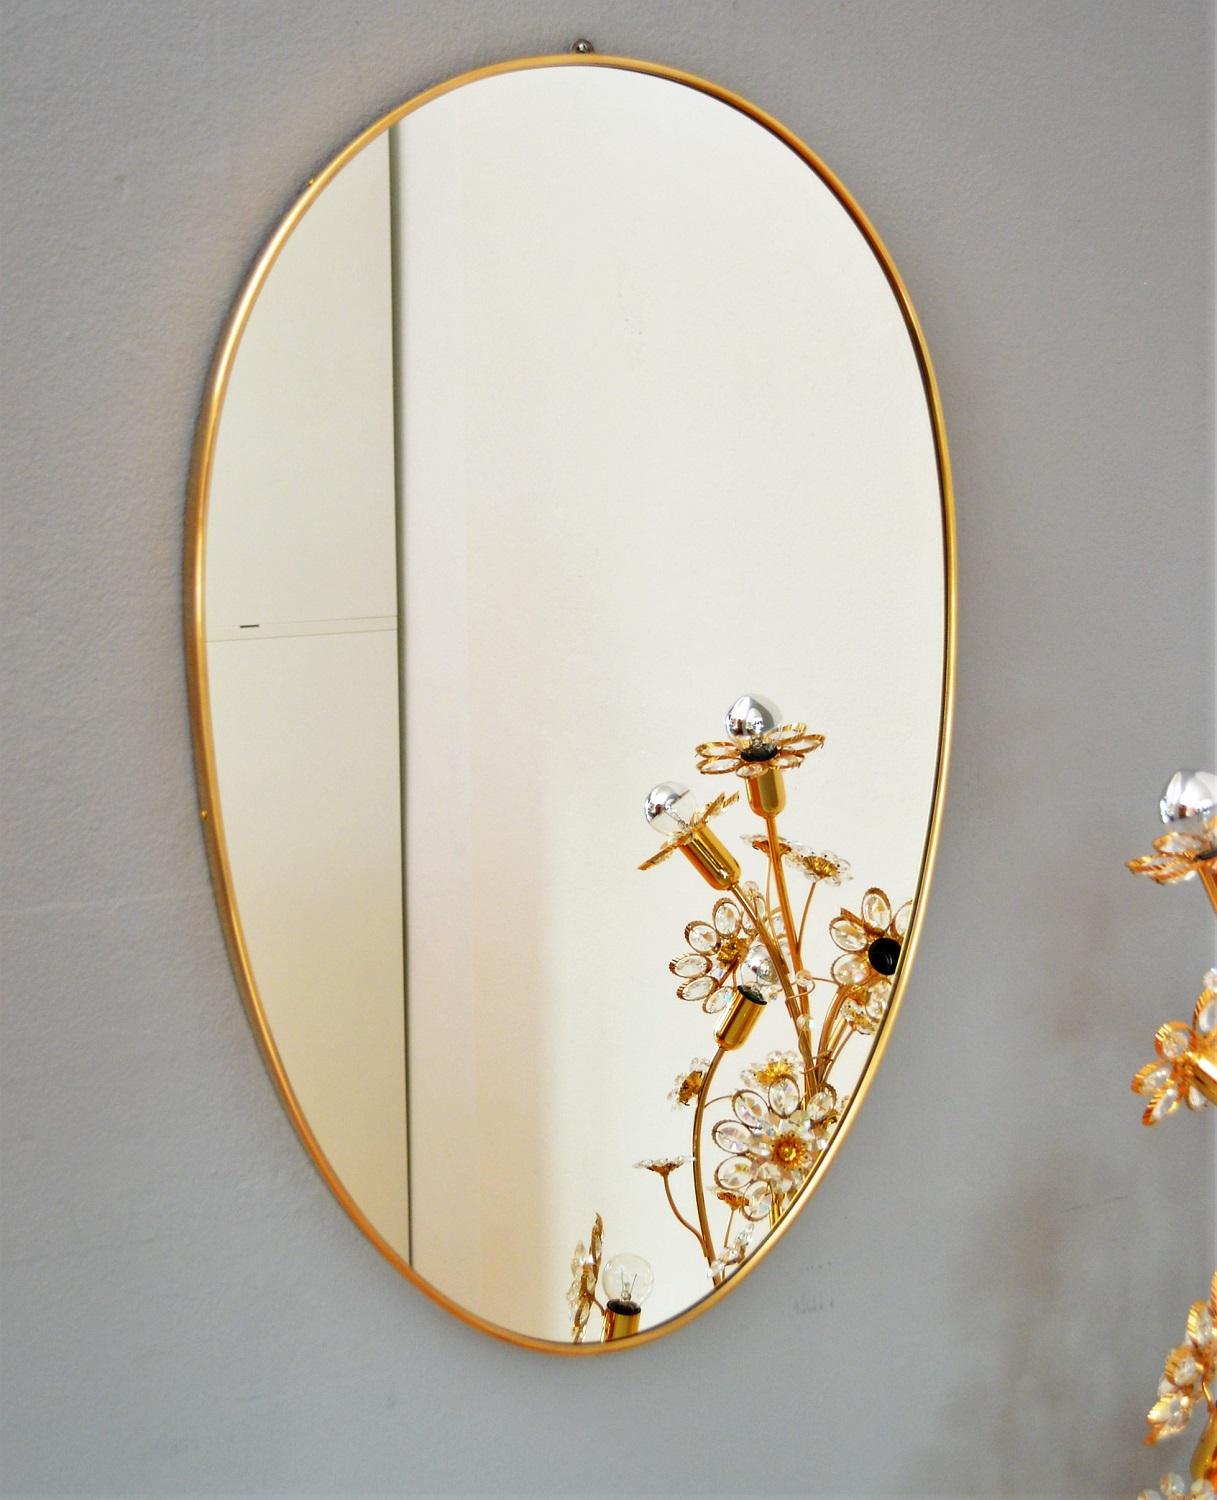 Beautiful Italian crystal glass mirror with shiny full brass frame in elegant oval form.
Made in the 1950s.
The brass have been completely polished and is very shiny, in excellent condition.
The mirror is in excellent condition a part only a